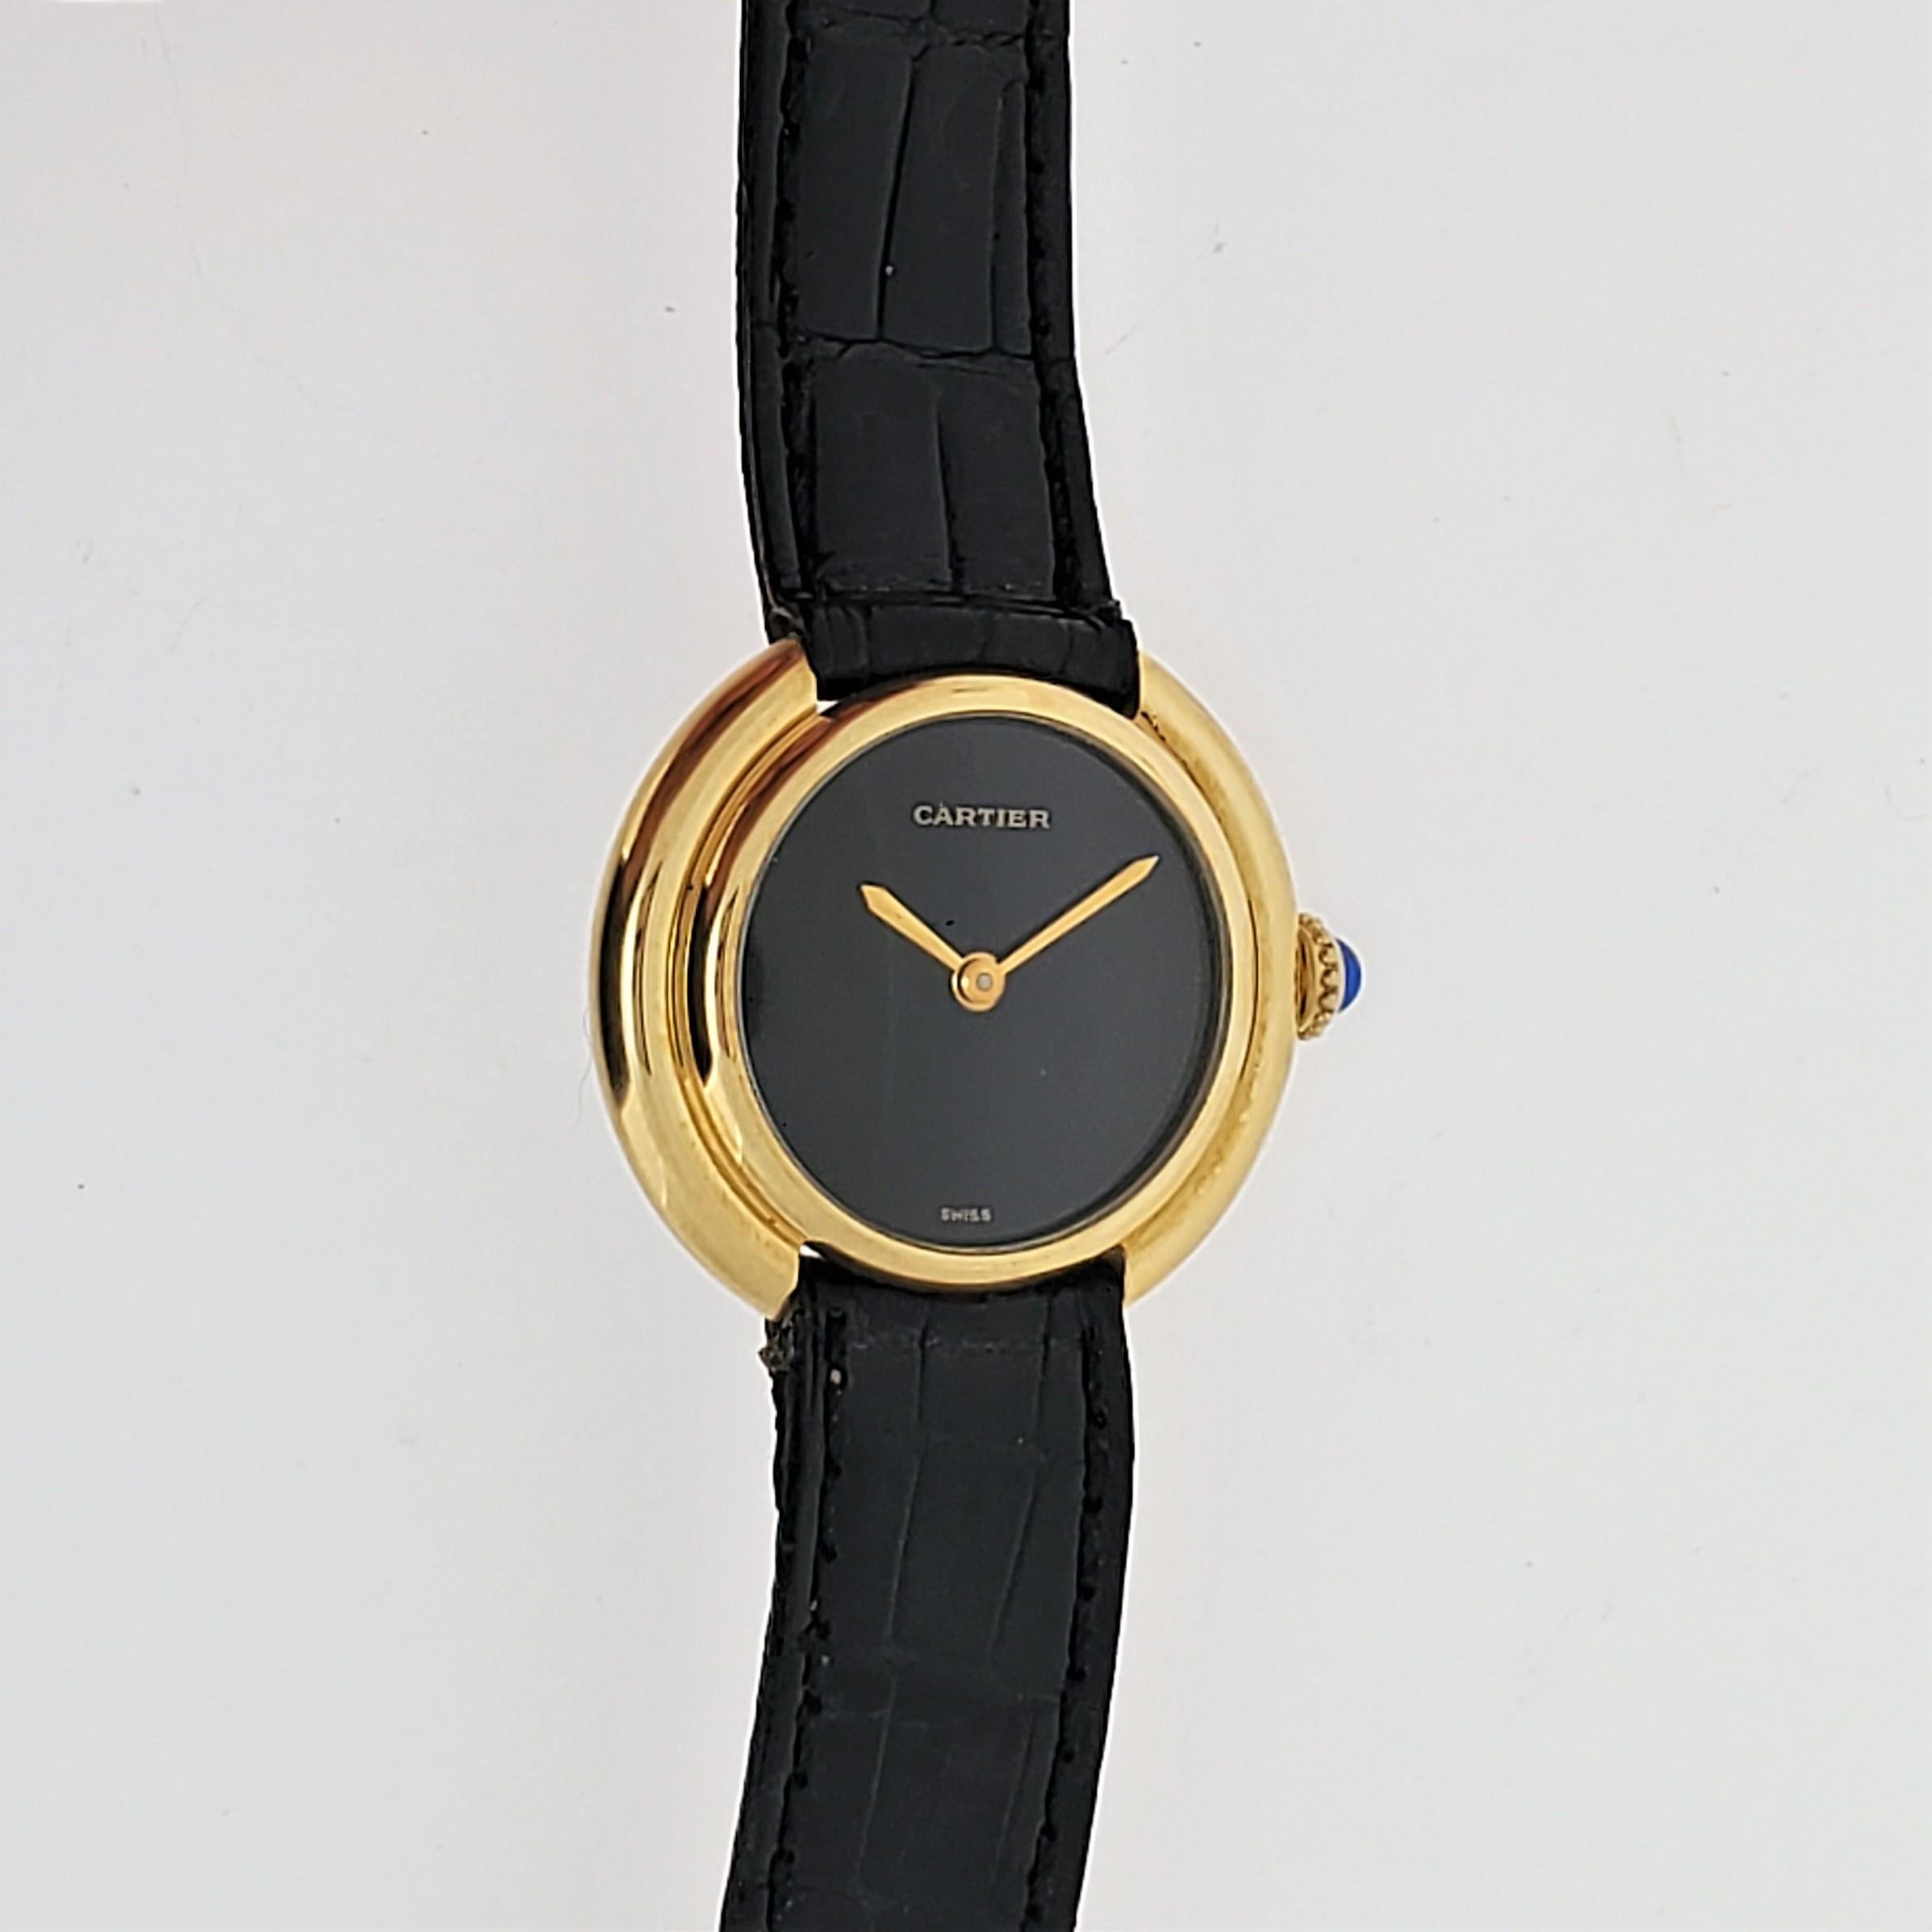 Vintage Cartier Paris Vendome Small Watch manual wind. Choice of Black or Roman  For Sale 1